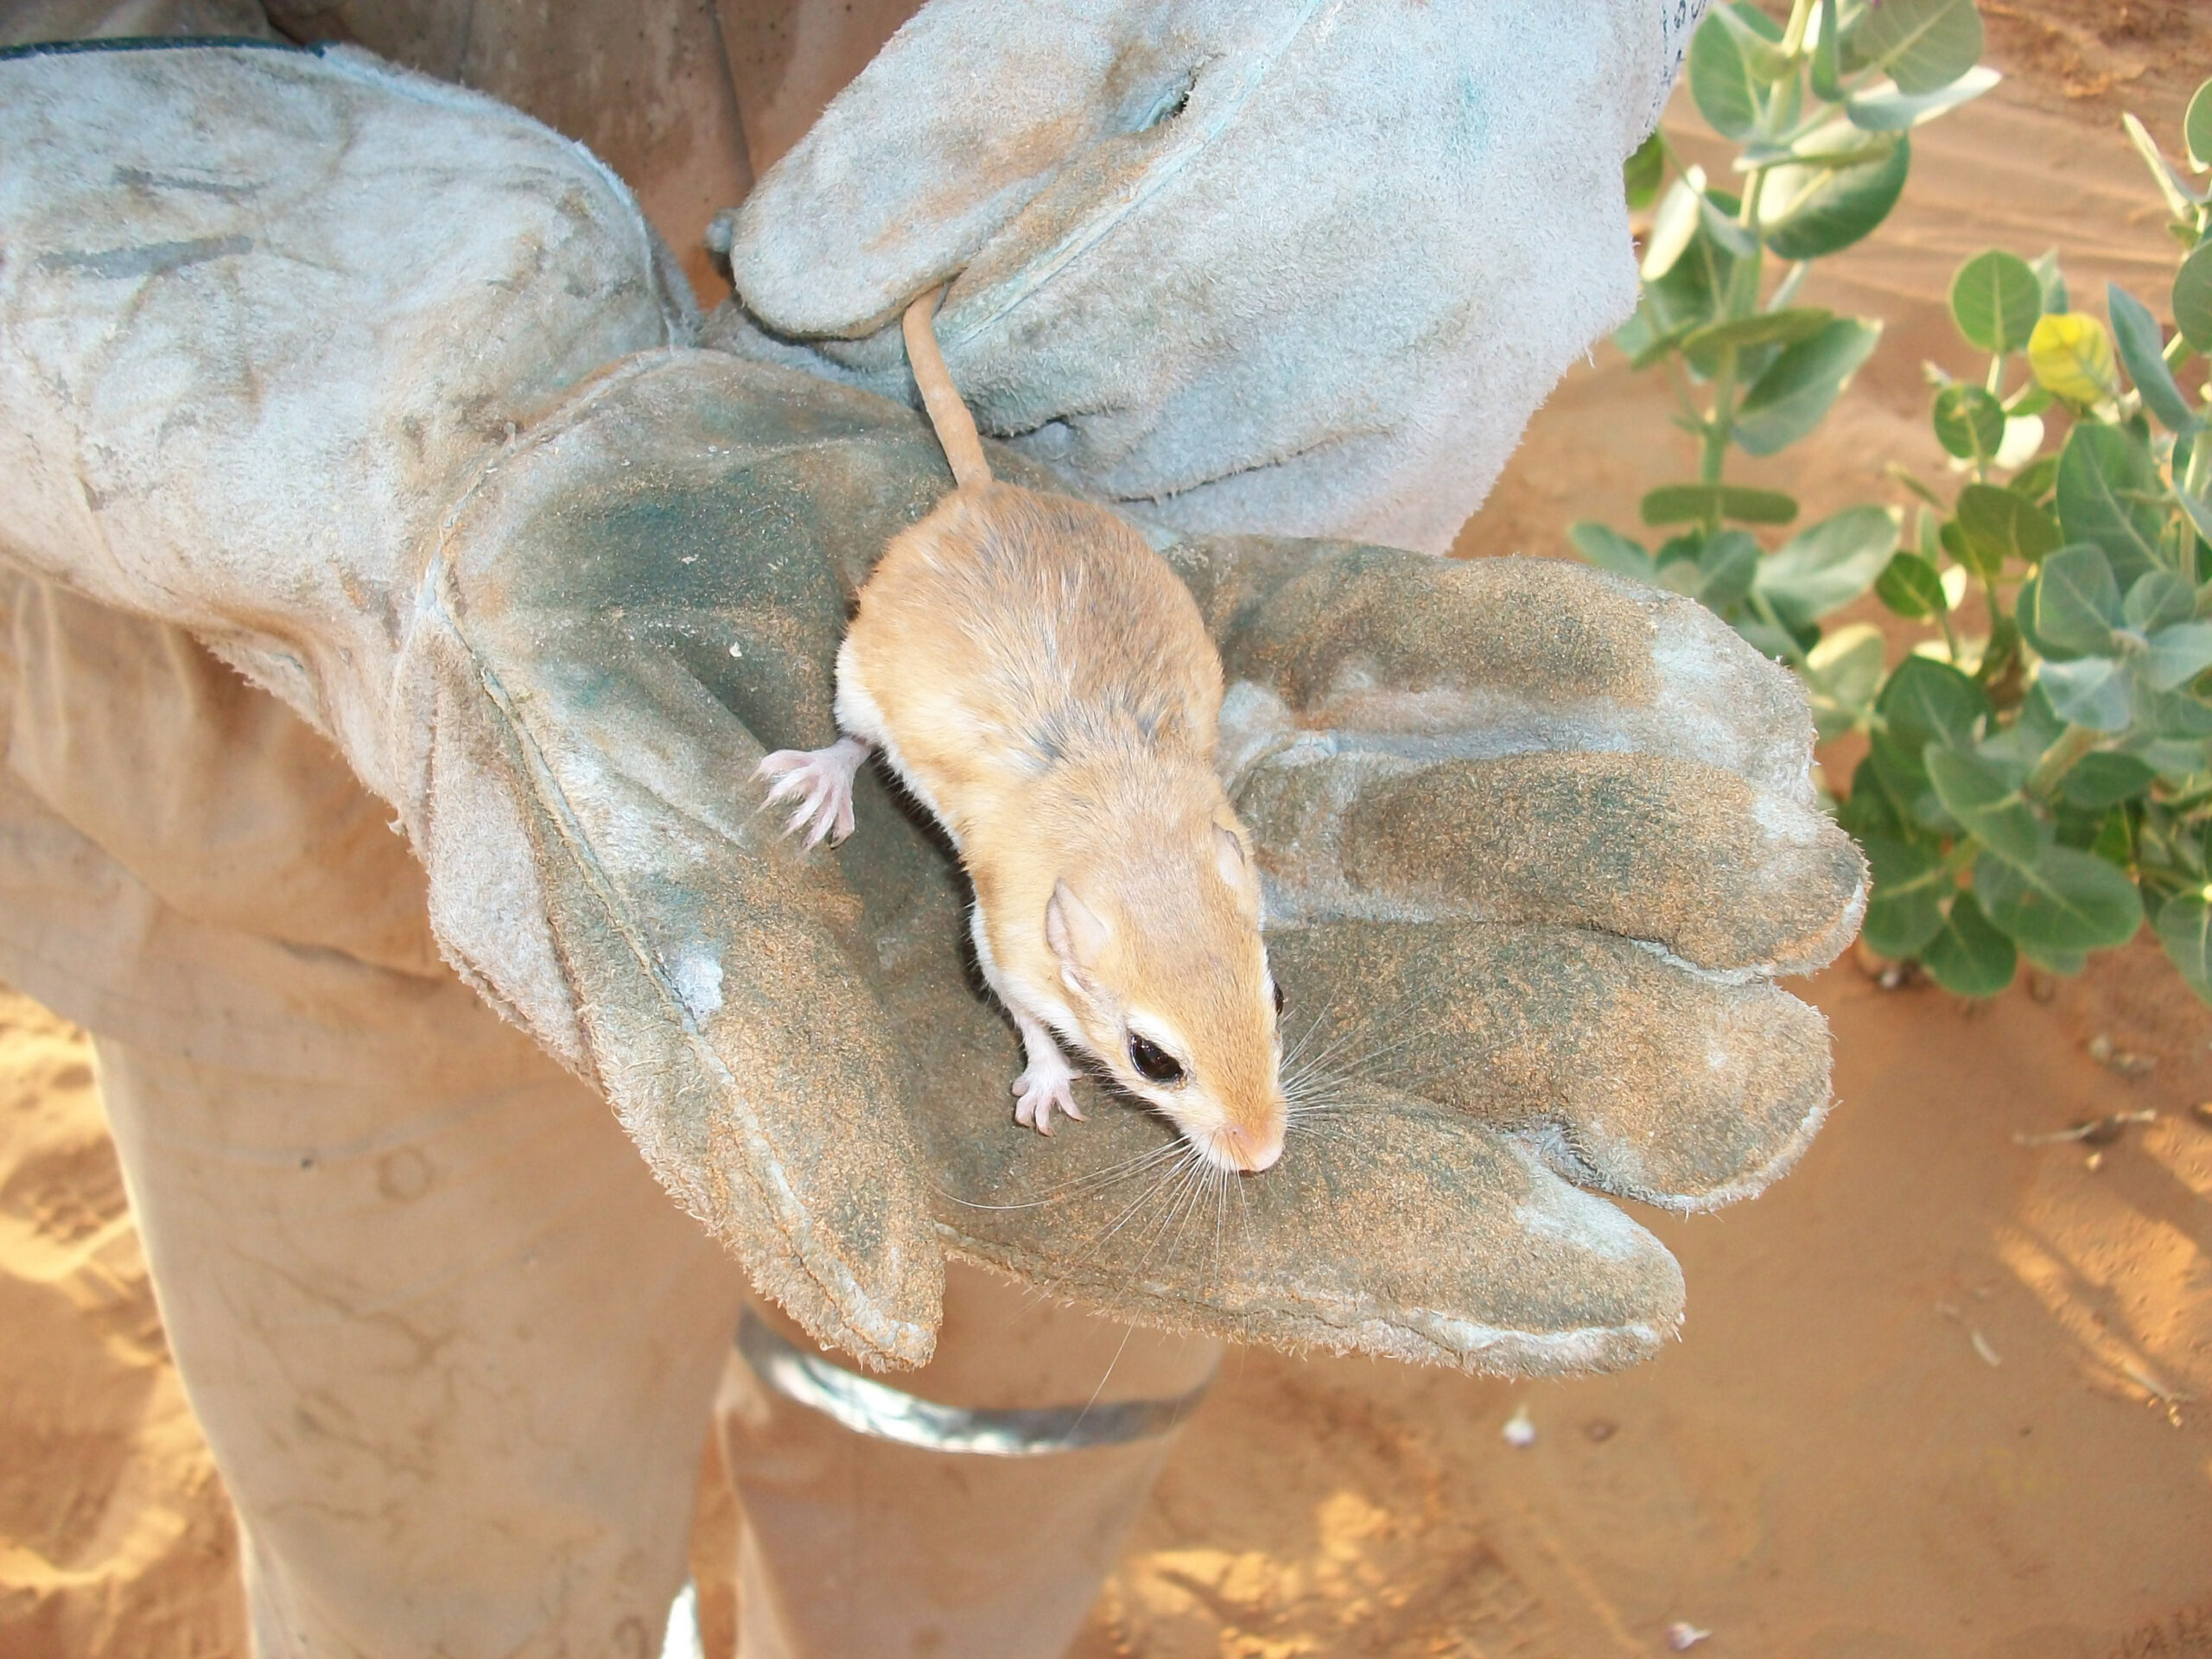 Desert mouse in a hand